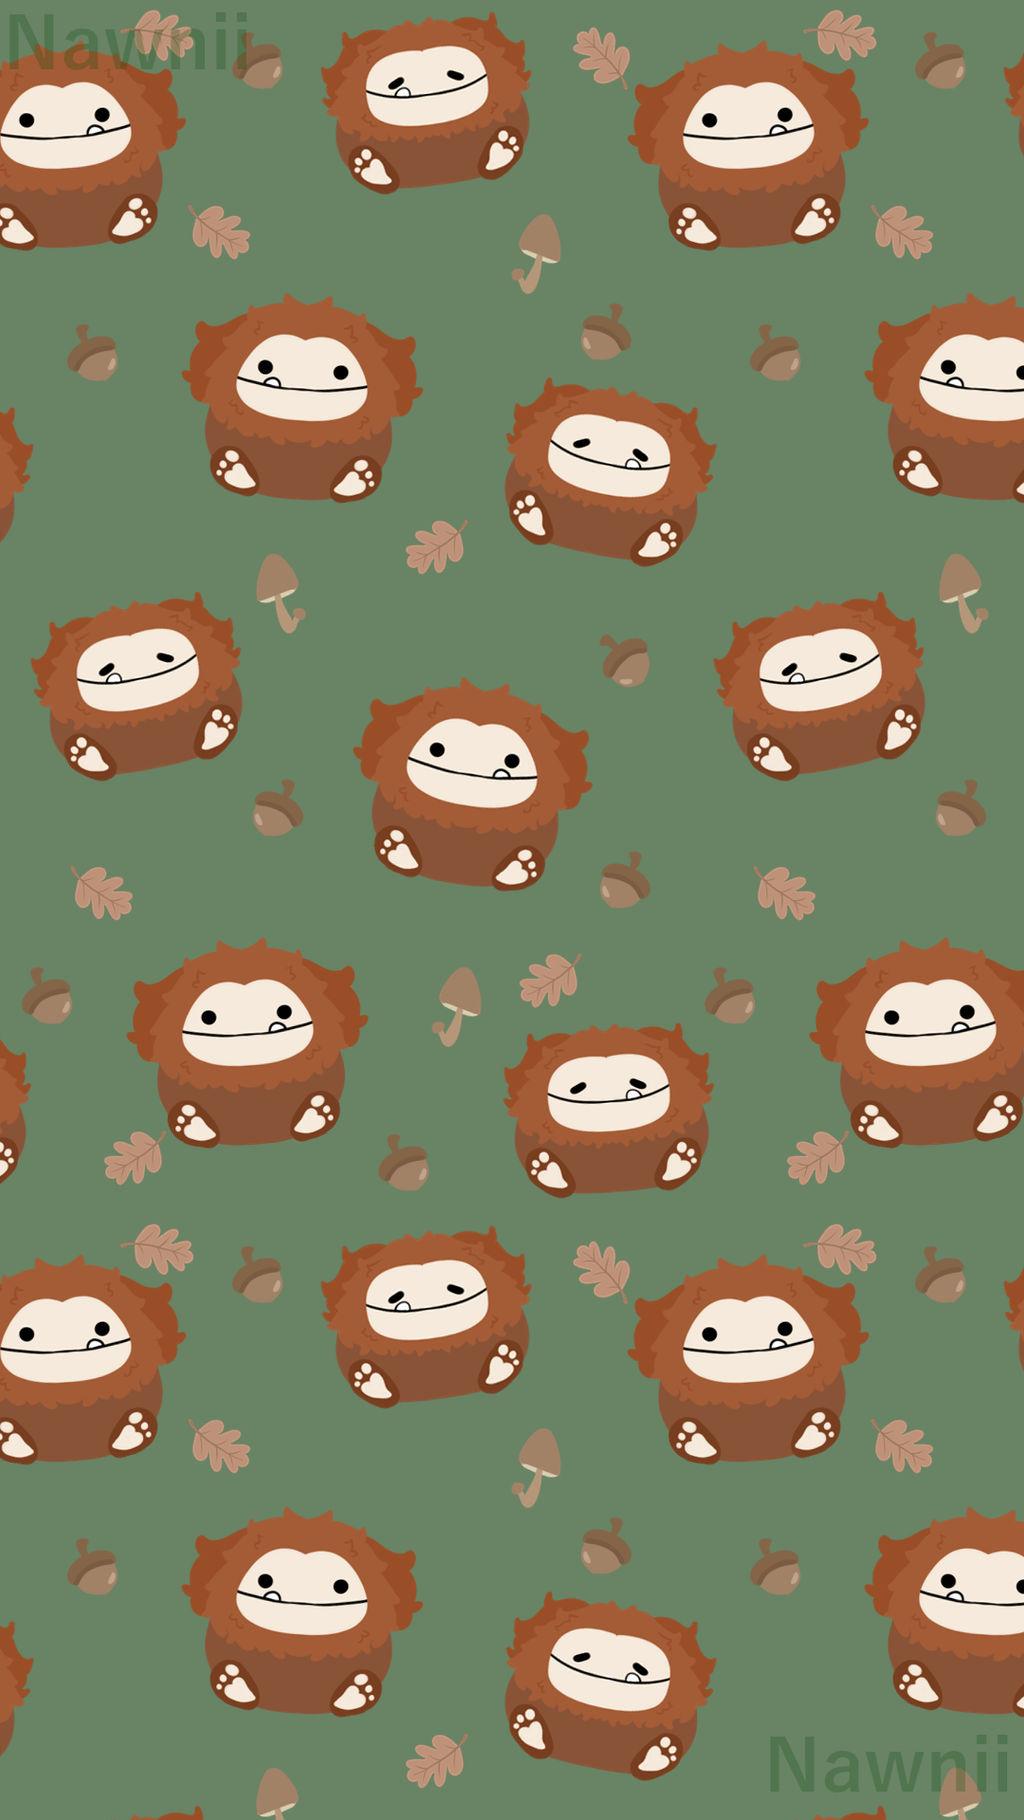 Benny Squishmallow Wallpaper by Nawnii on